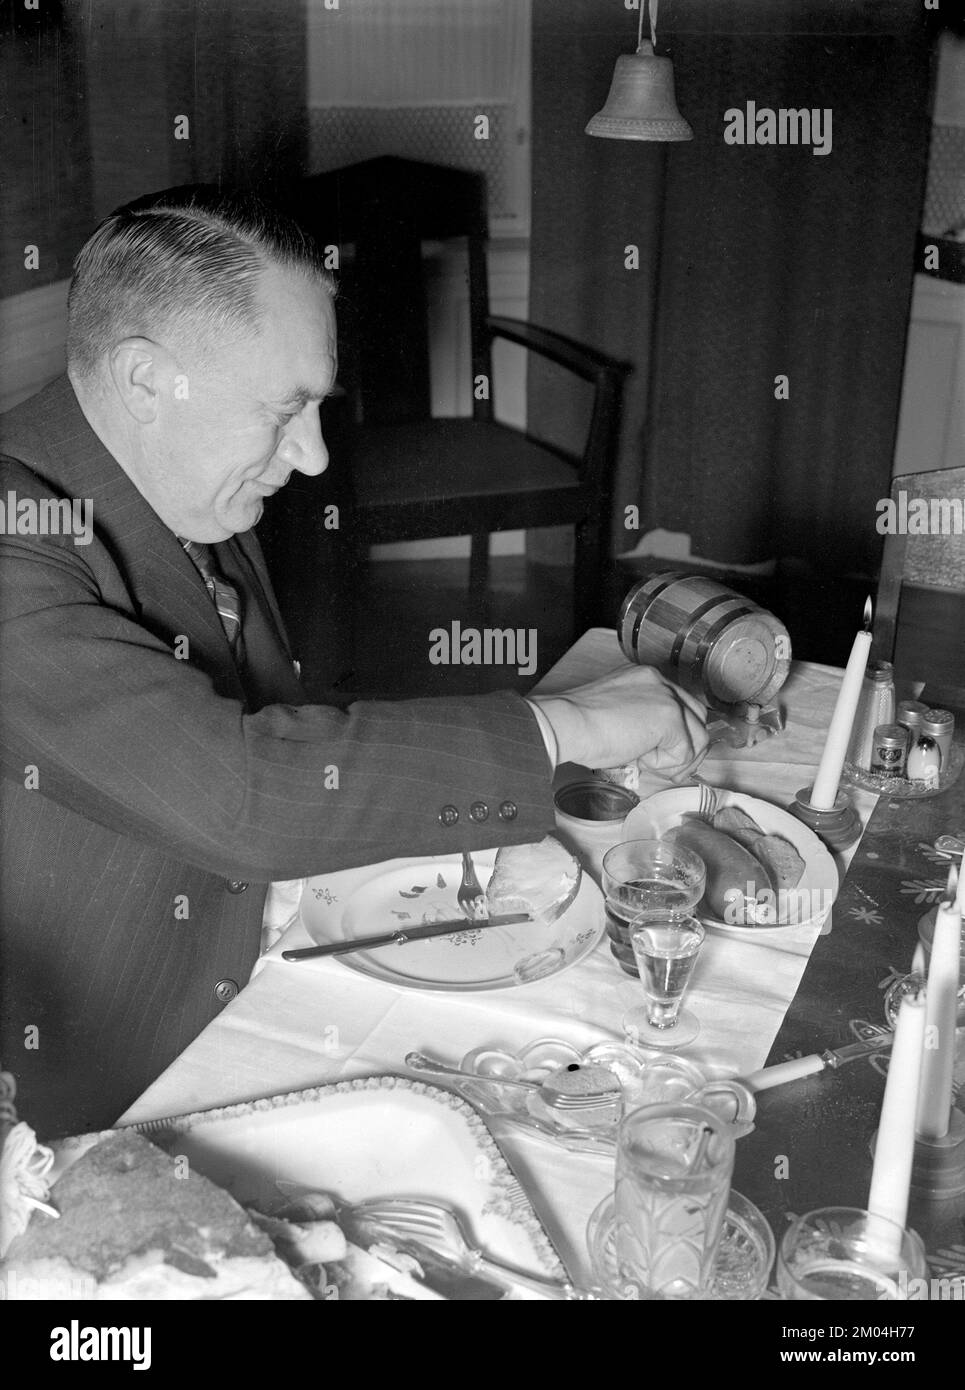 At christmas in the 1940s. A man is having christmas dinner and enjoys the typical traditional food and drinks from the table. Sweden december 1940 Kristoffersson 42-9 Stock Photo